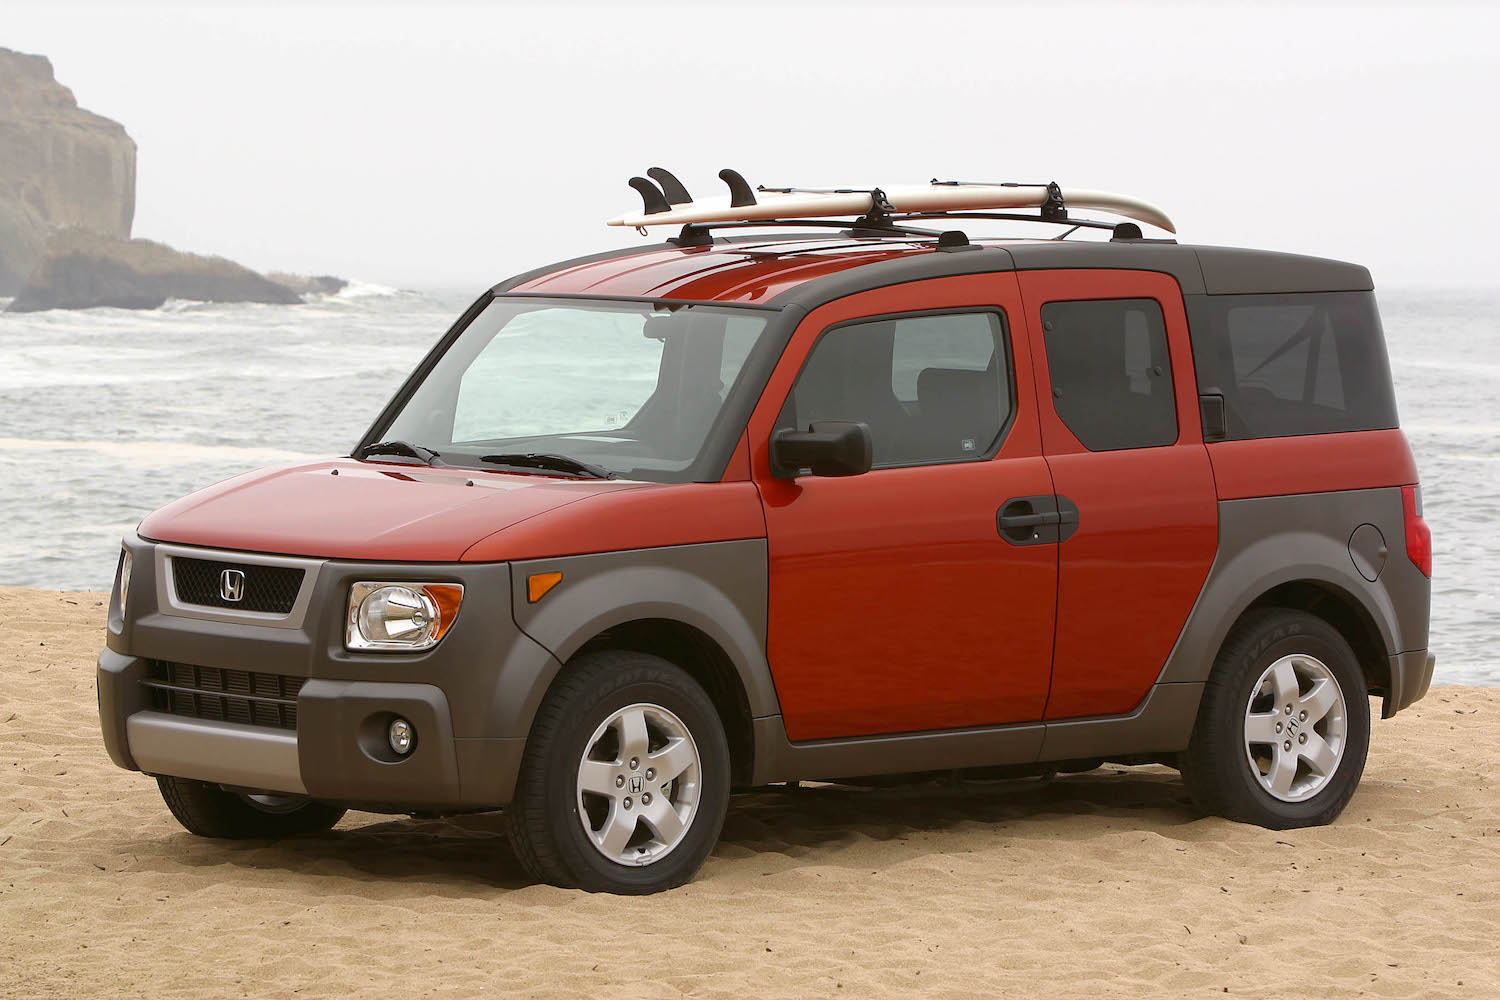 The Best Cheap Used SUVs Under $5,000 According to KBB